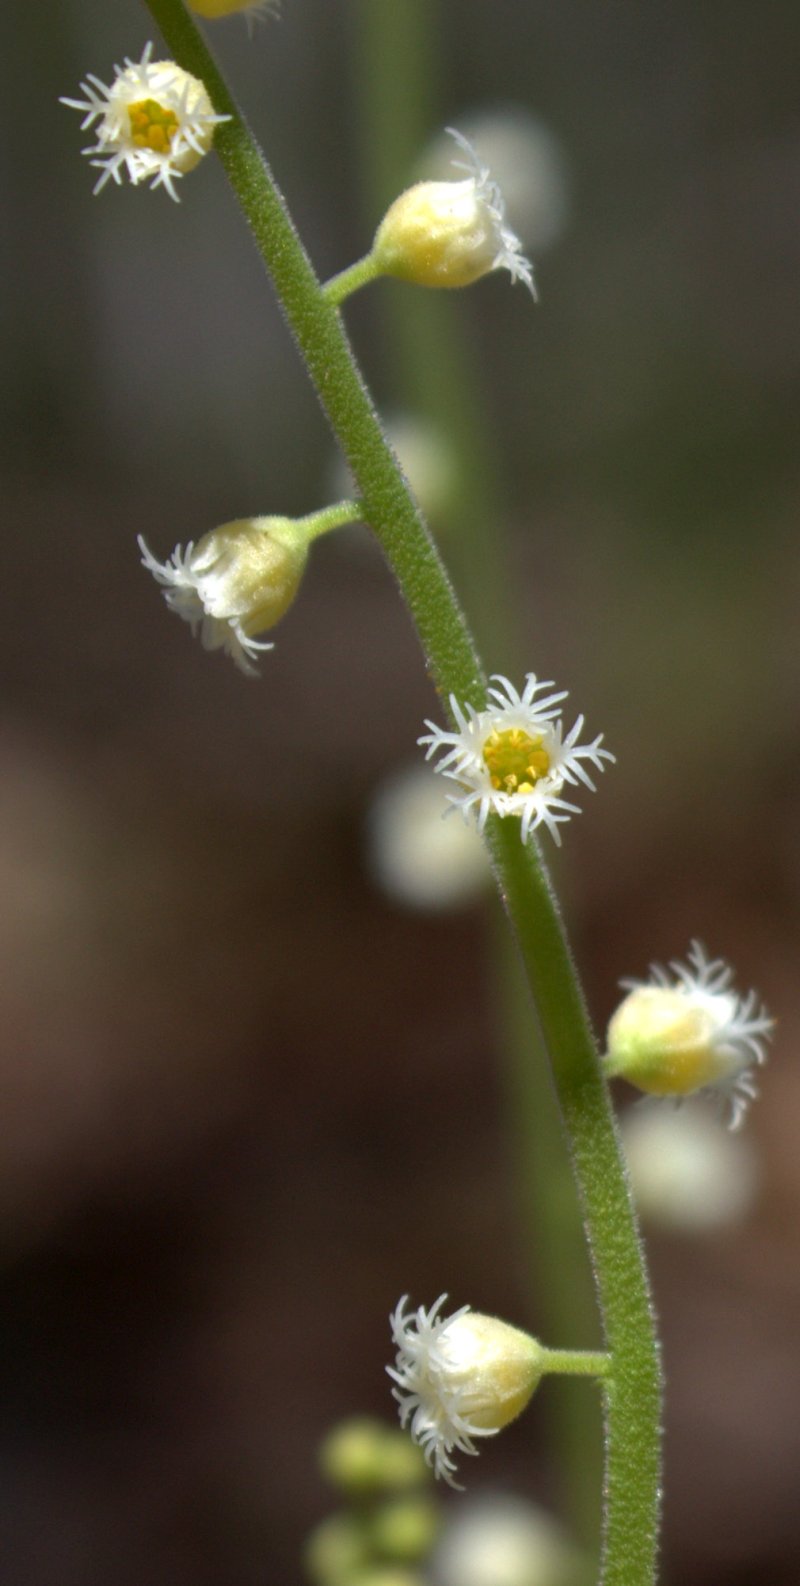 The fancy fringe on the edge of <em>Miterwort</em> flowers makes these little white and yellow flowers really stand out.